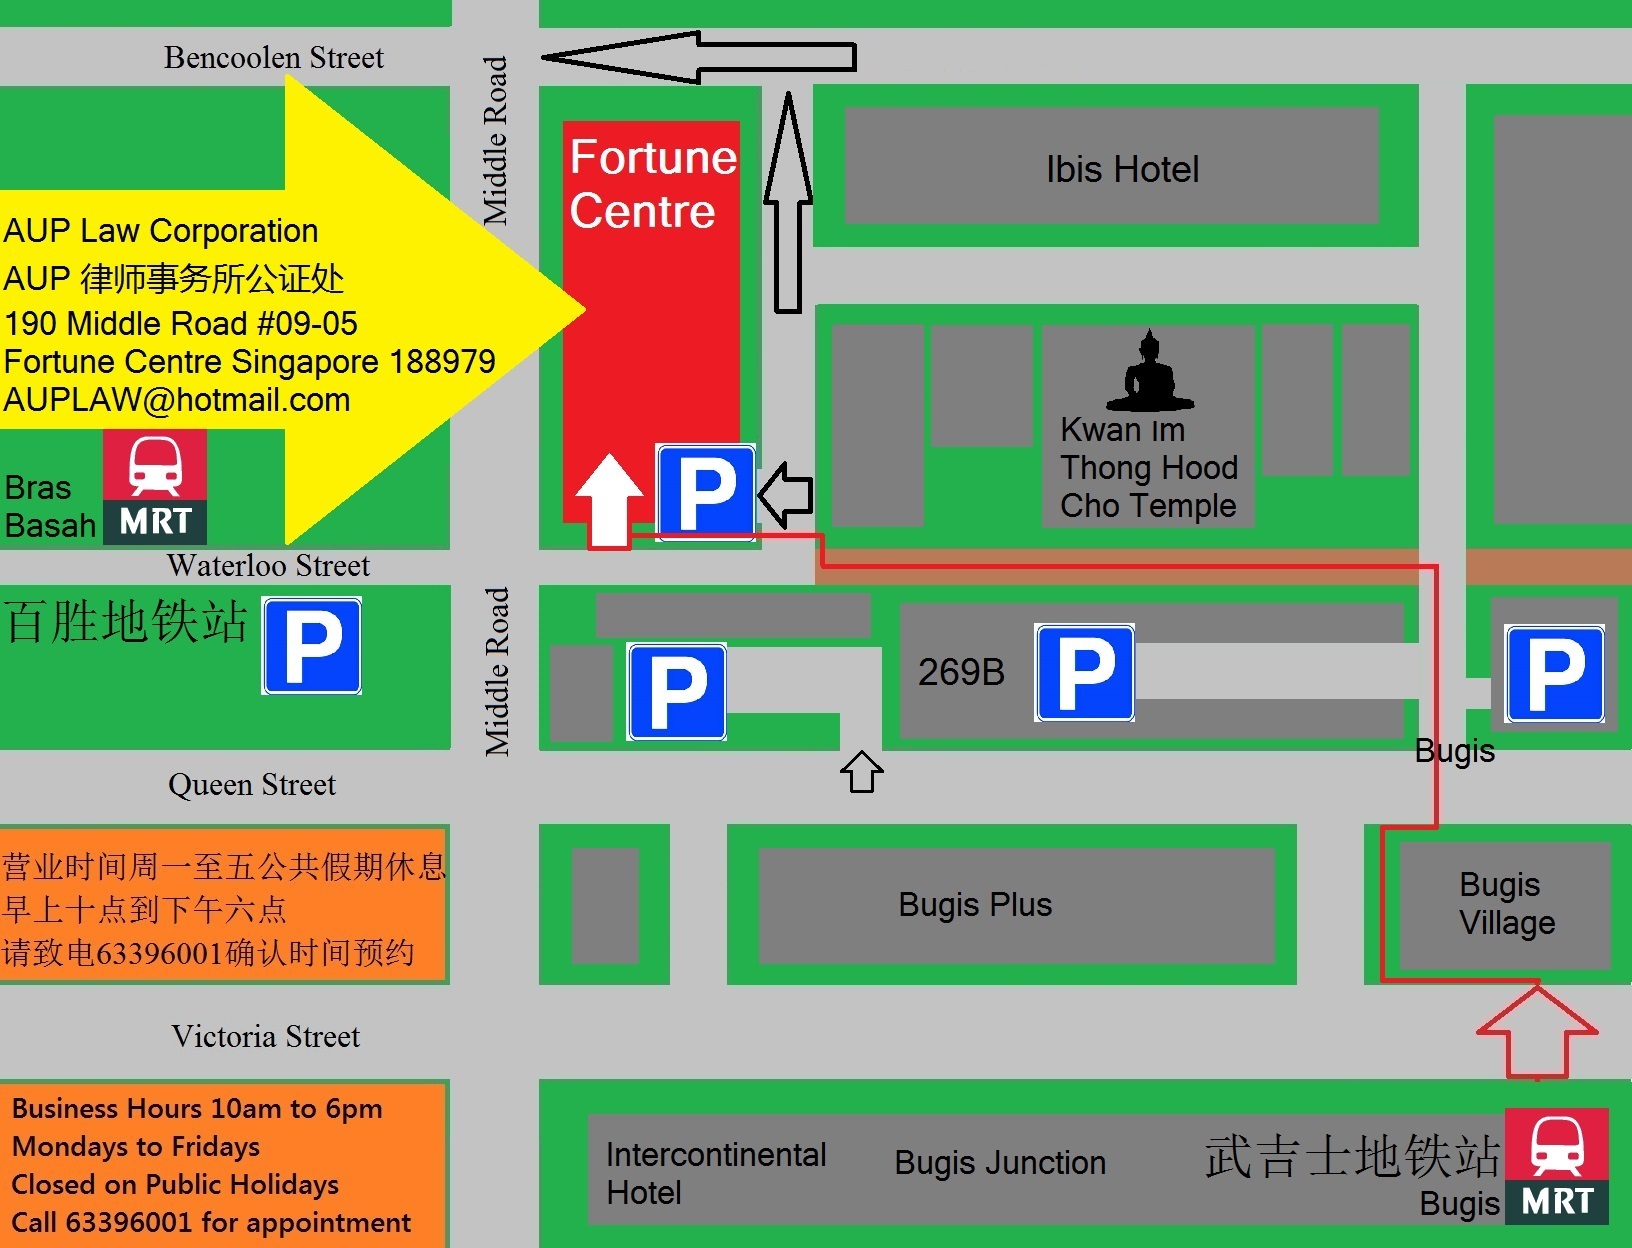 20170608 Fortune Centre map color road Opening Hours final email address final.jpg